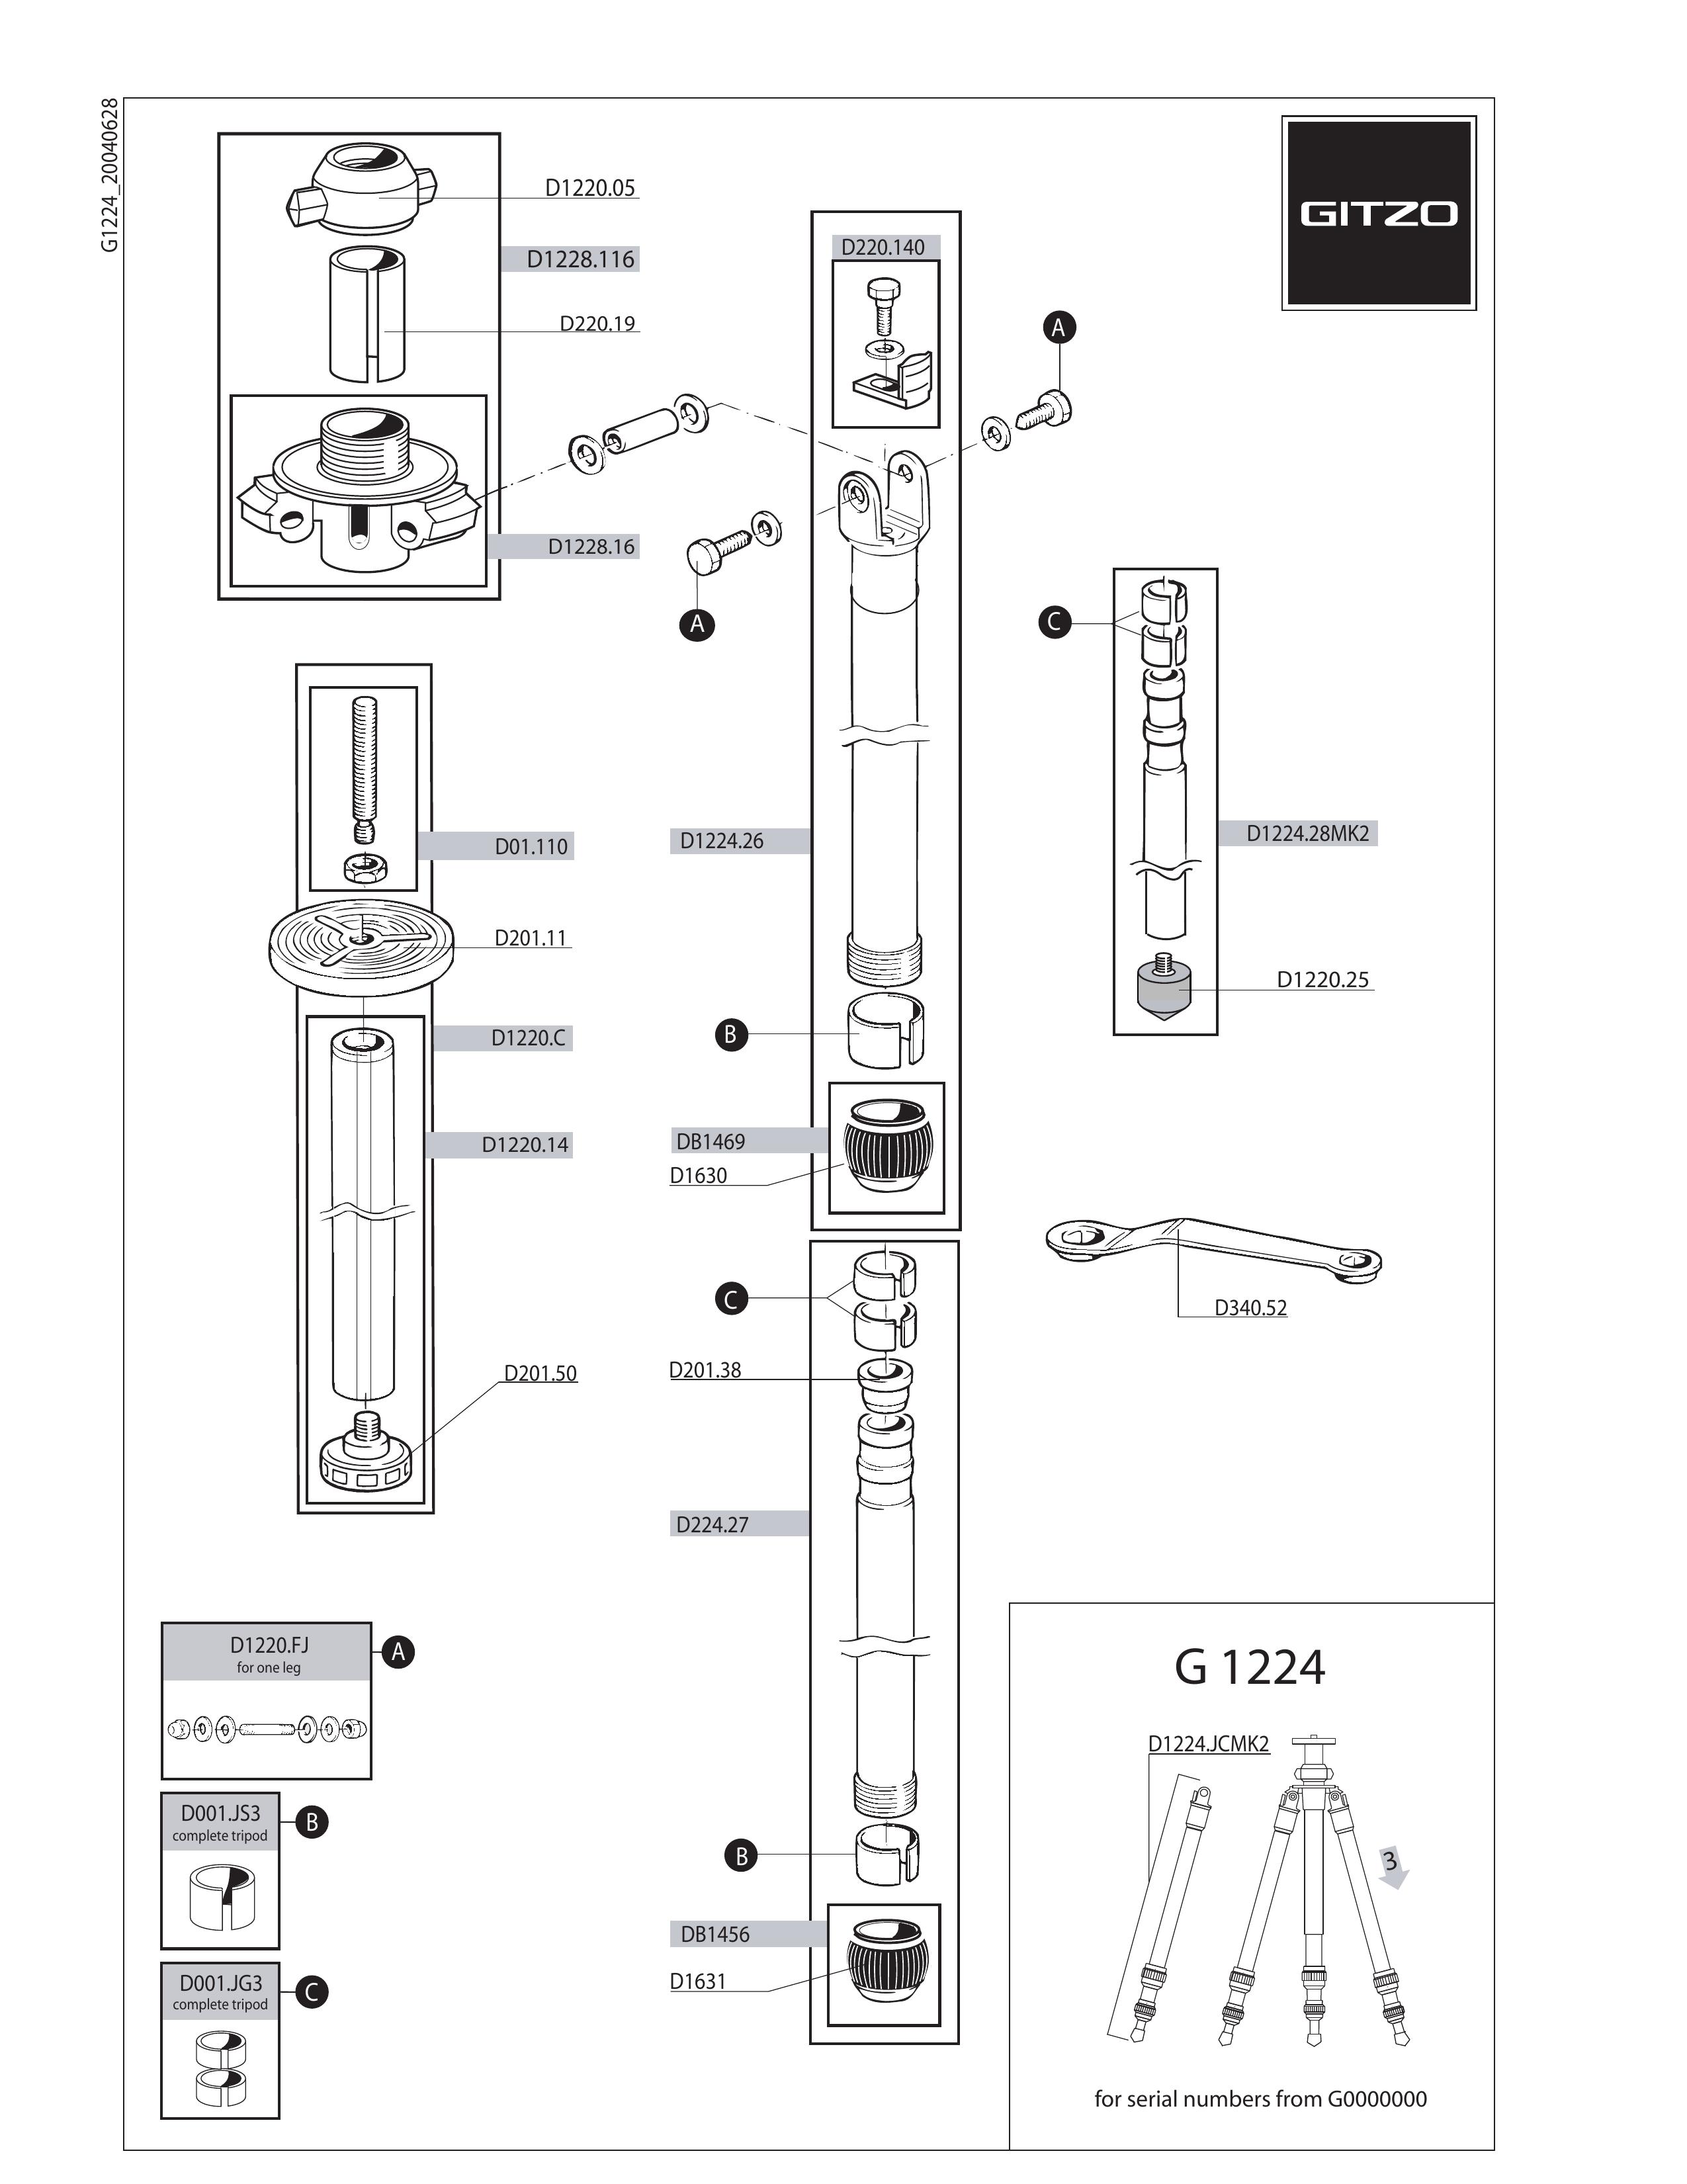 Gitzo G1224 Camcorder Accessories User Manual (Page 1)